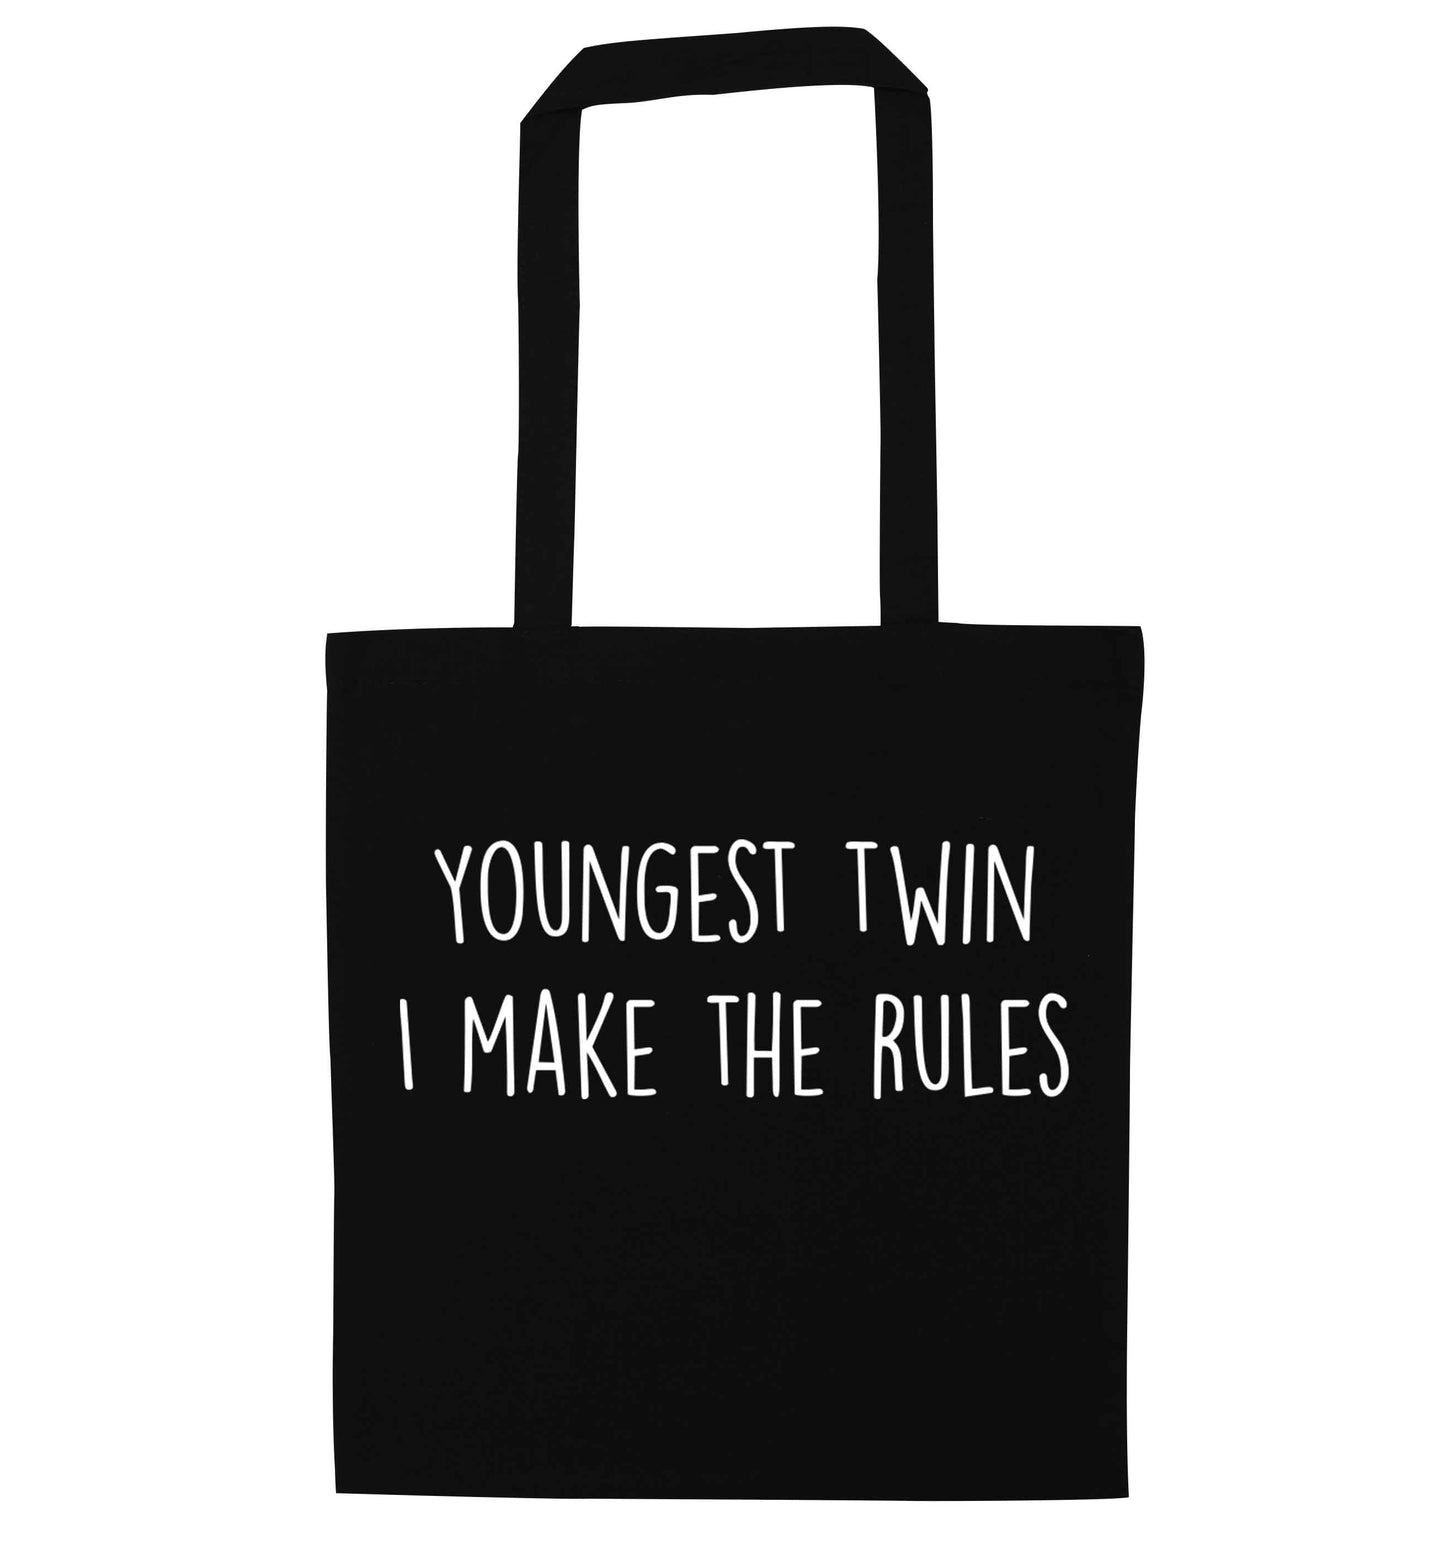 Youngest twin I make the rules black tote bag